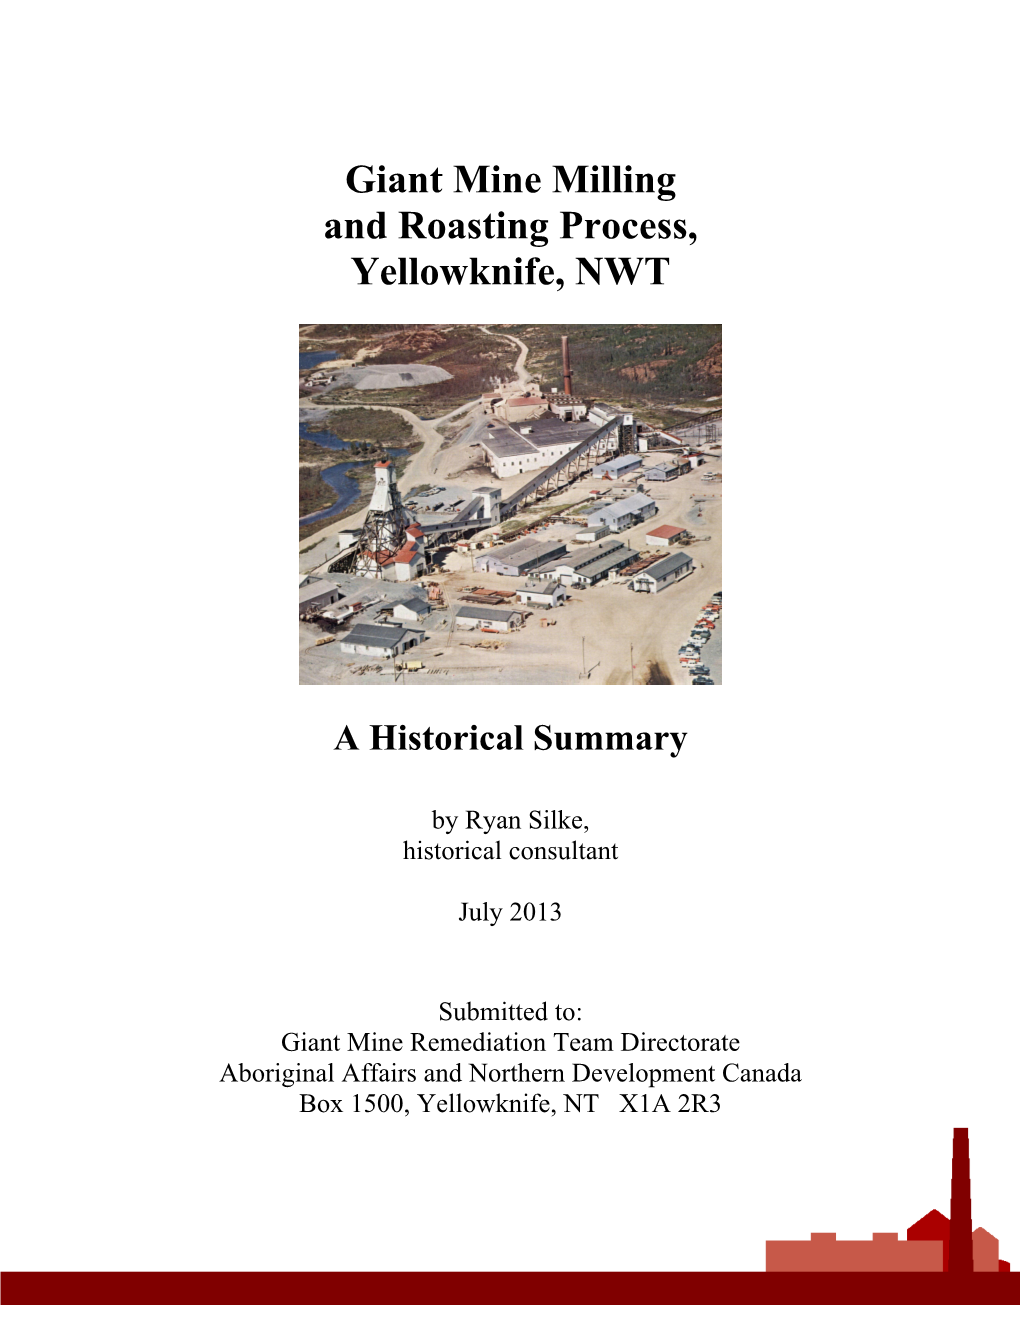 Giant Mine Milling and Roasting Process, Yellowknife, NWT